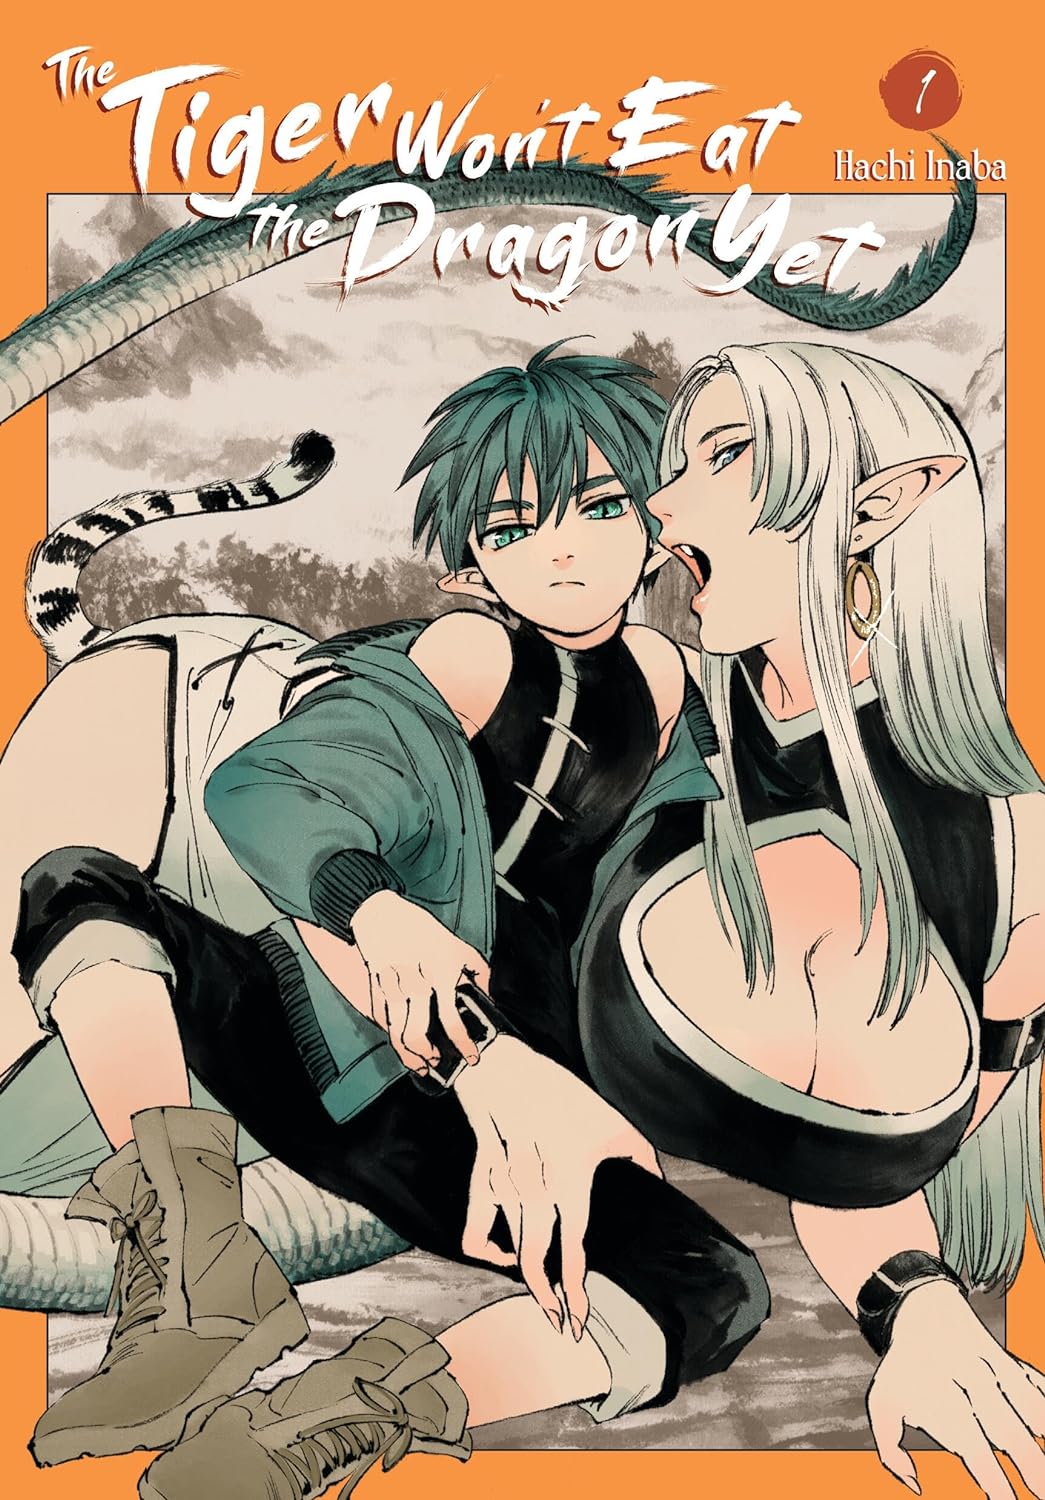 The Tiger Won't Eat the Dragon Yet Vol. 01